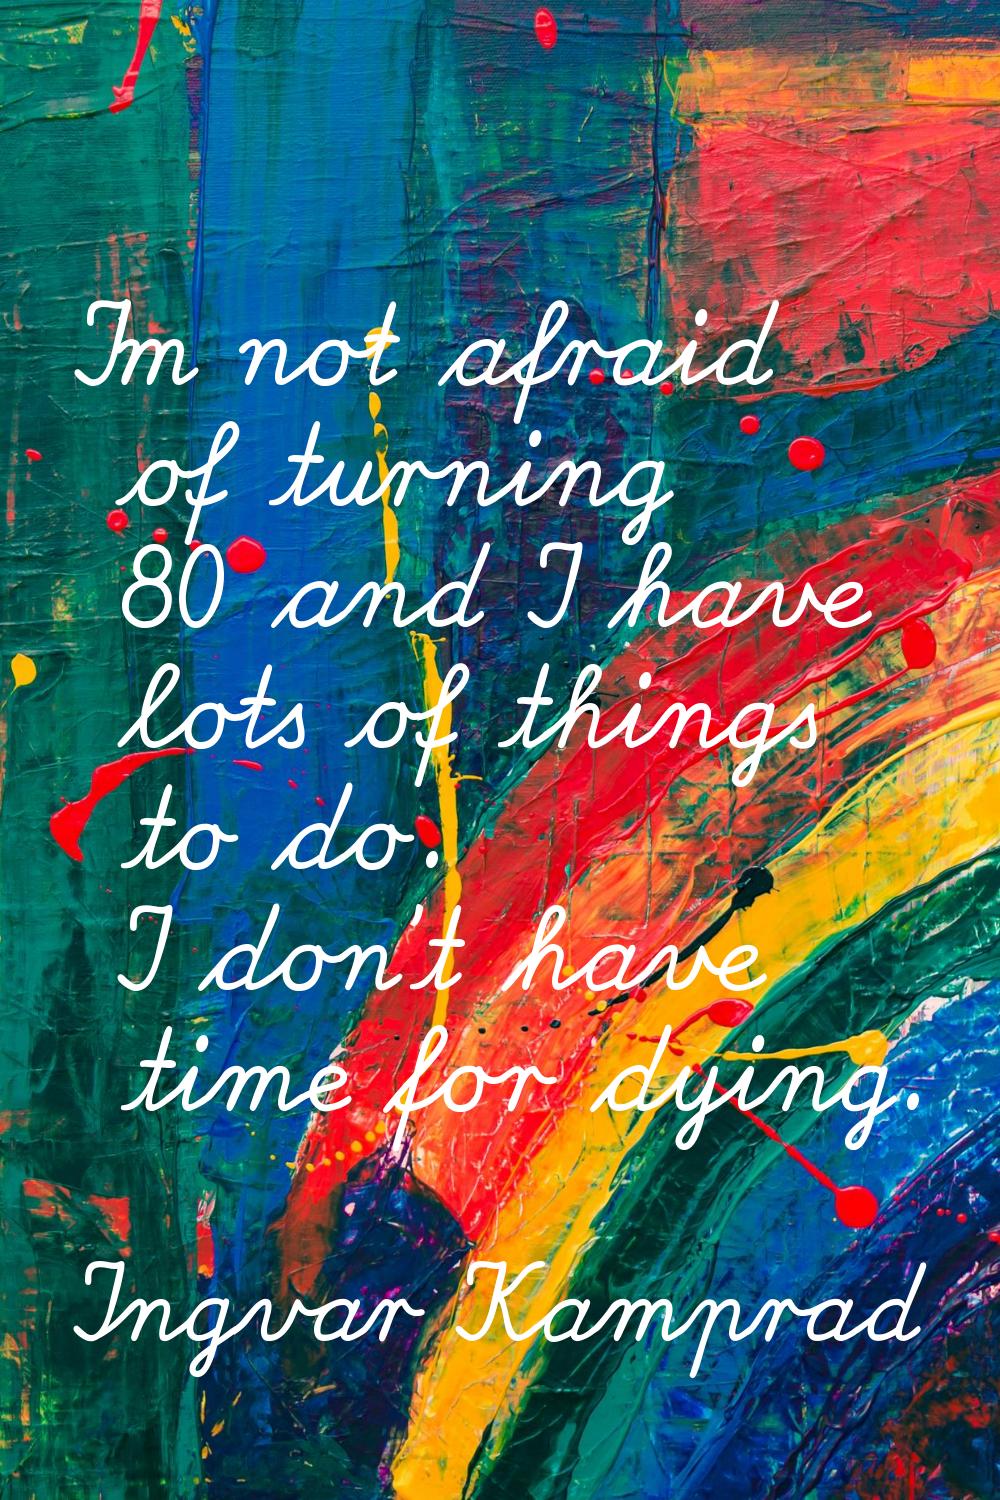 I'm not afraid of turning 80 and I have lots of things to do. I don't have time for dying.